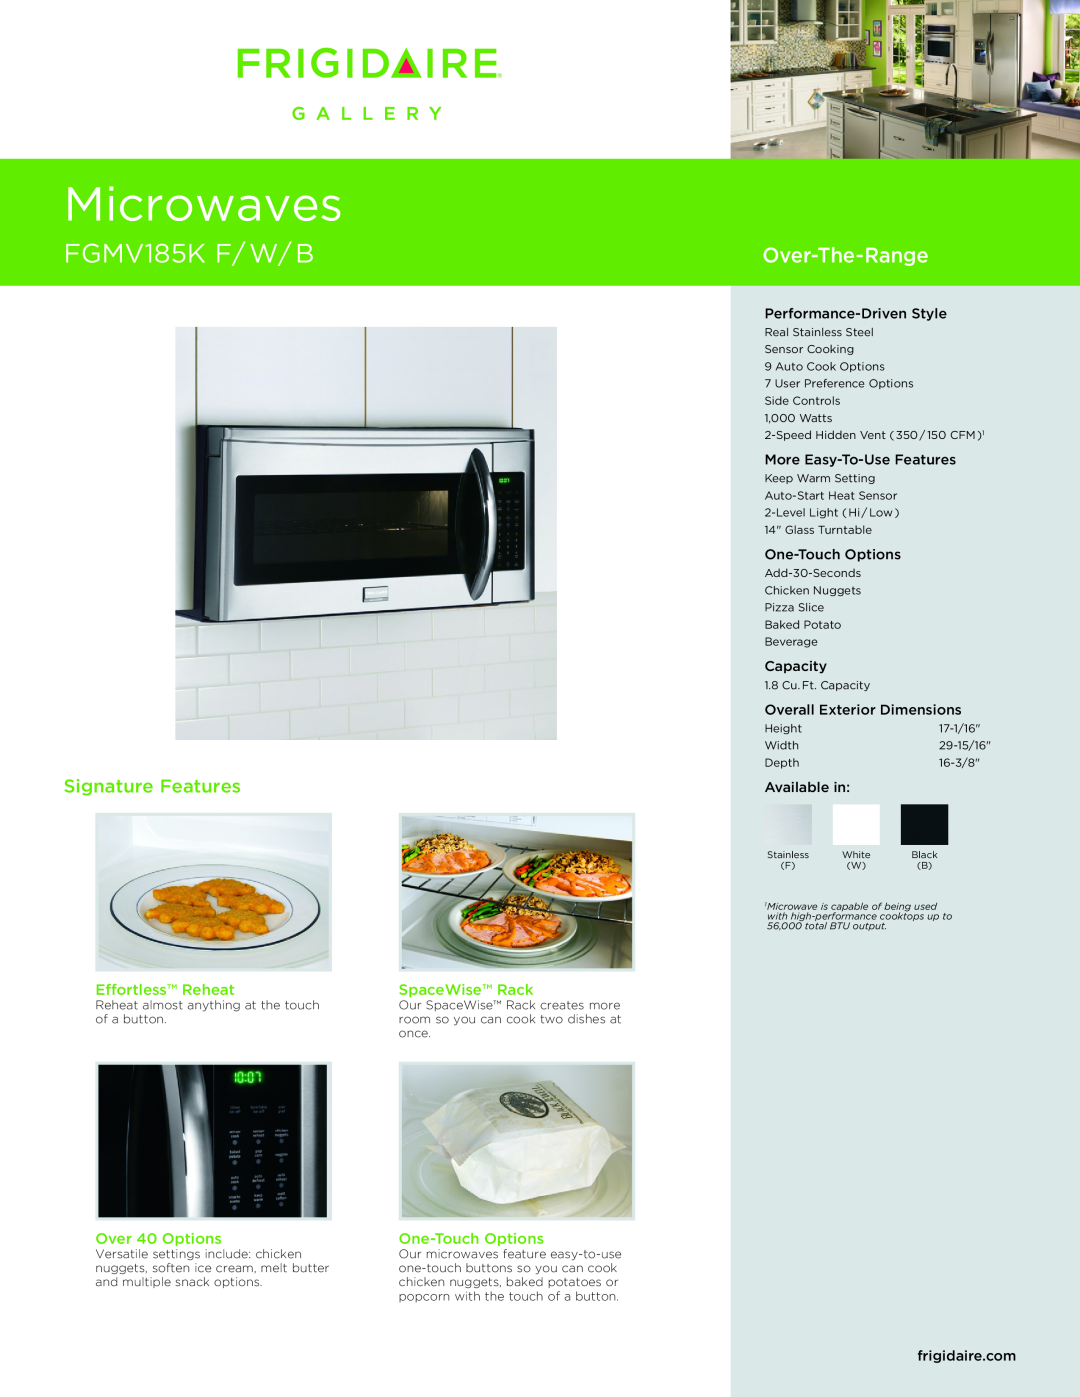 Frigidaire FGMV185K dimensions Performance-DrivenStyle, More Easy-To-UseFeatures, One-TouchOptions, Capacity, Available in 